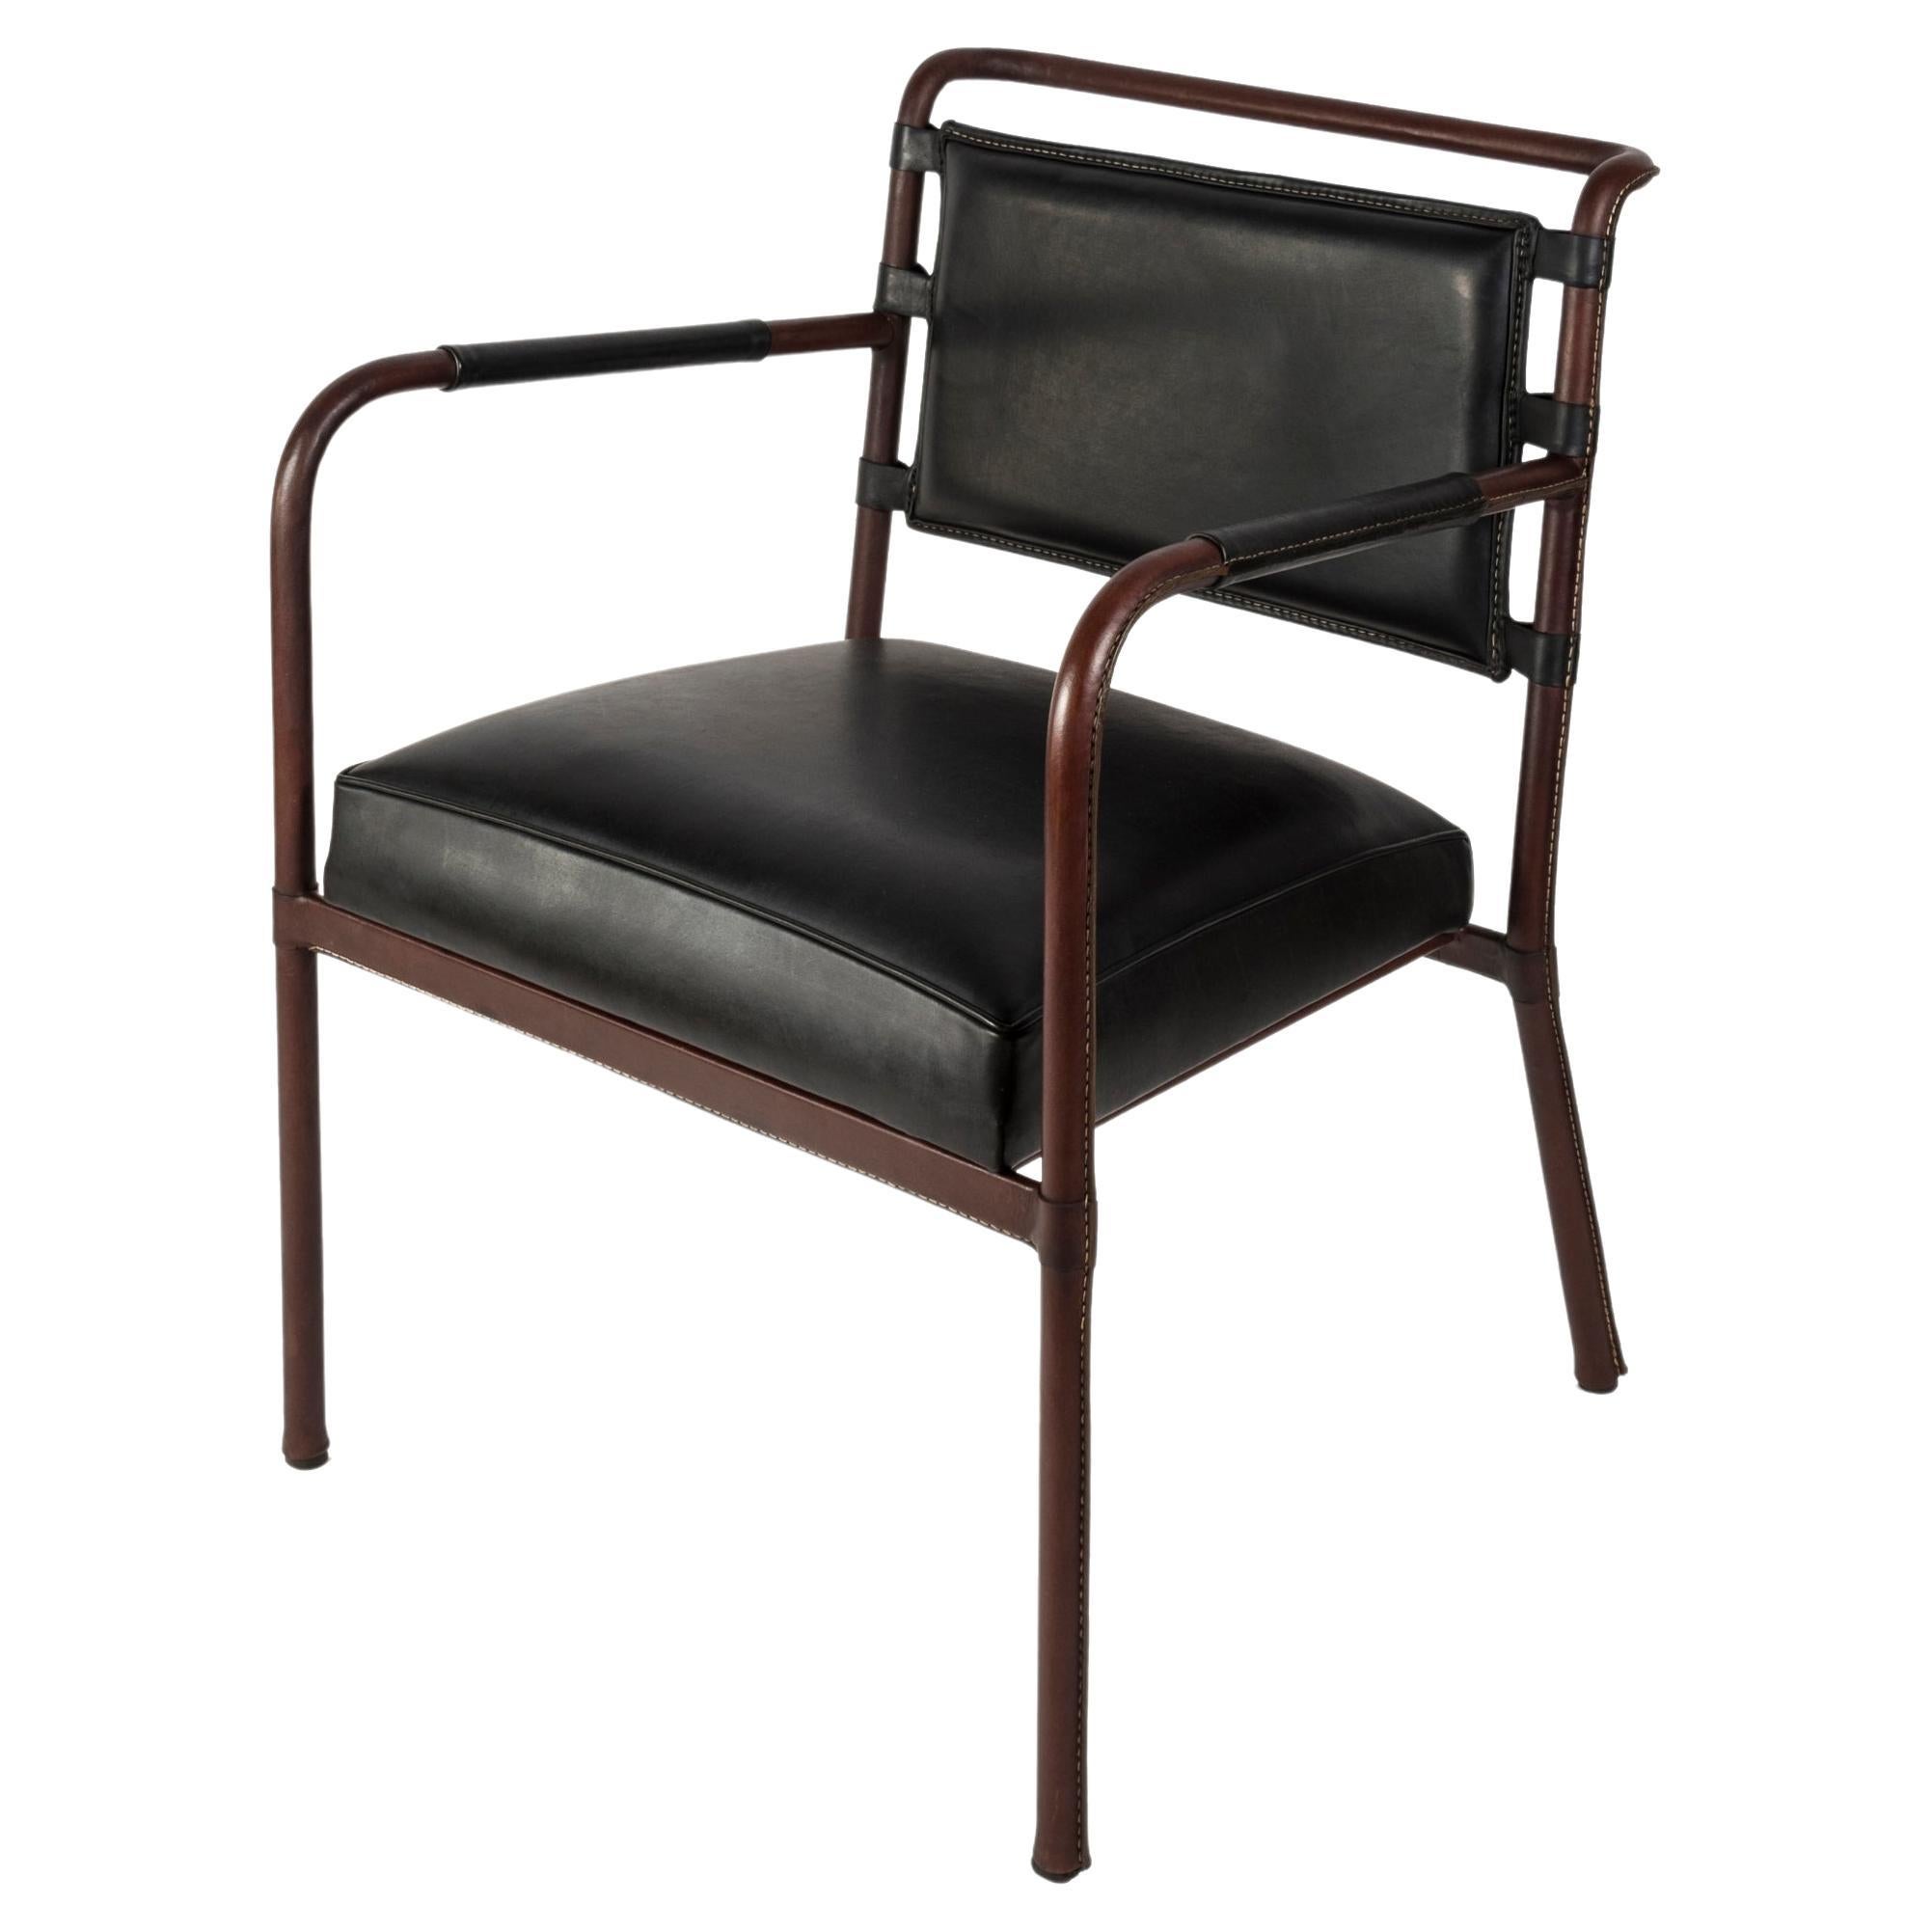 1950's Stitched Leather armchair by Jacques adnet